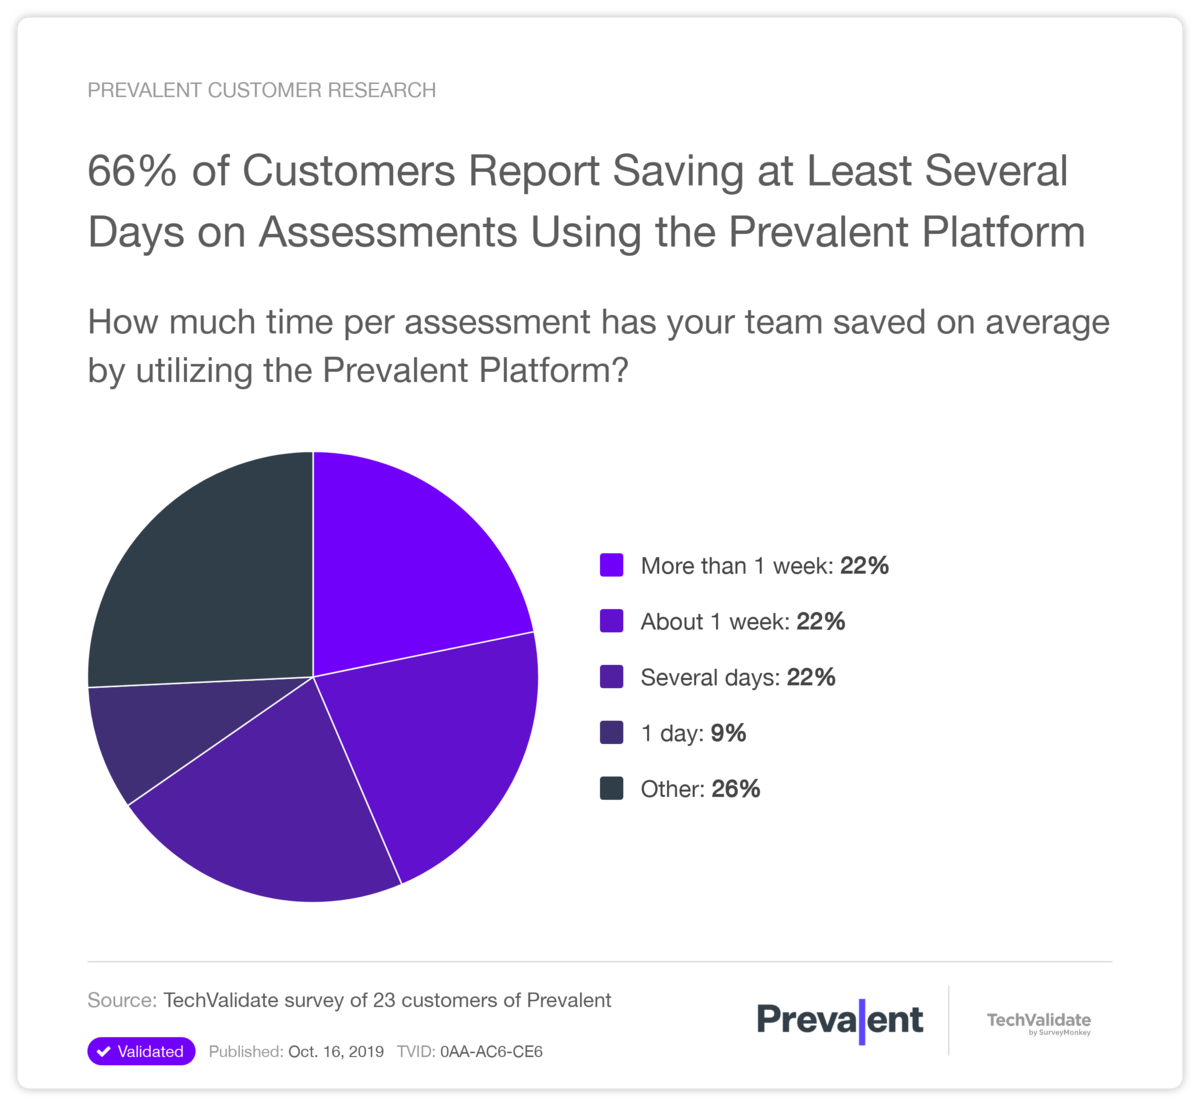 66% of Customers Report Saving at Least Several Days on Assessments Using the Prevalent Platform